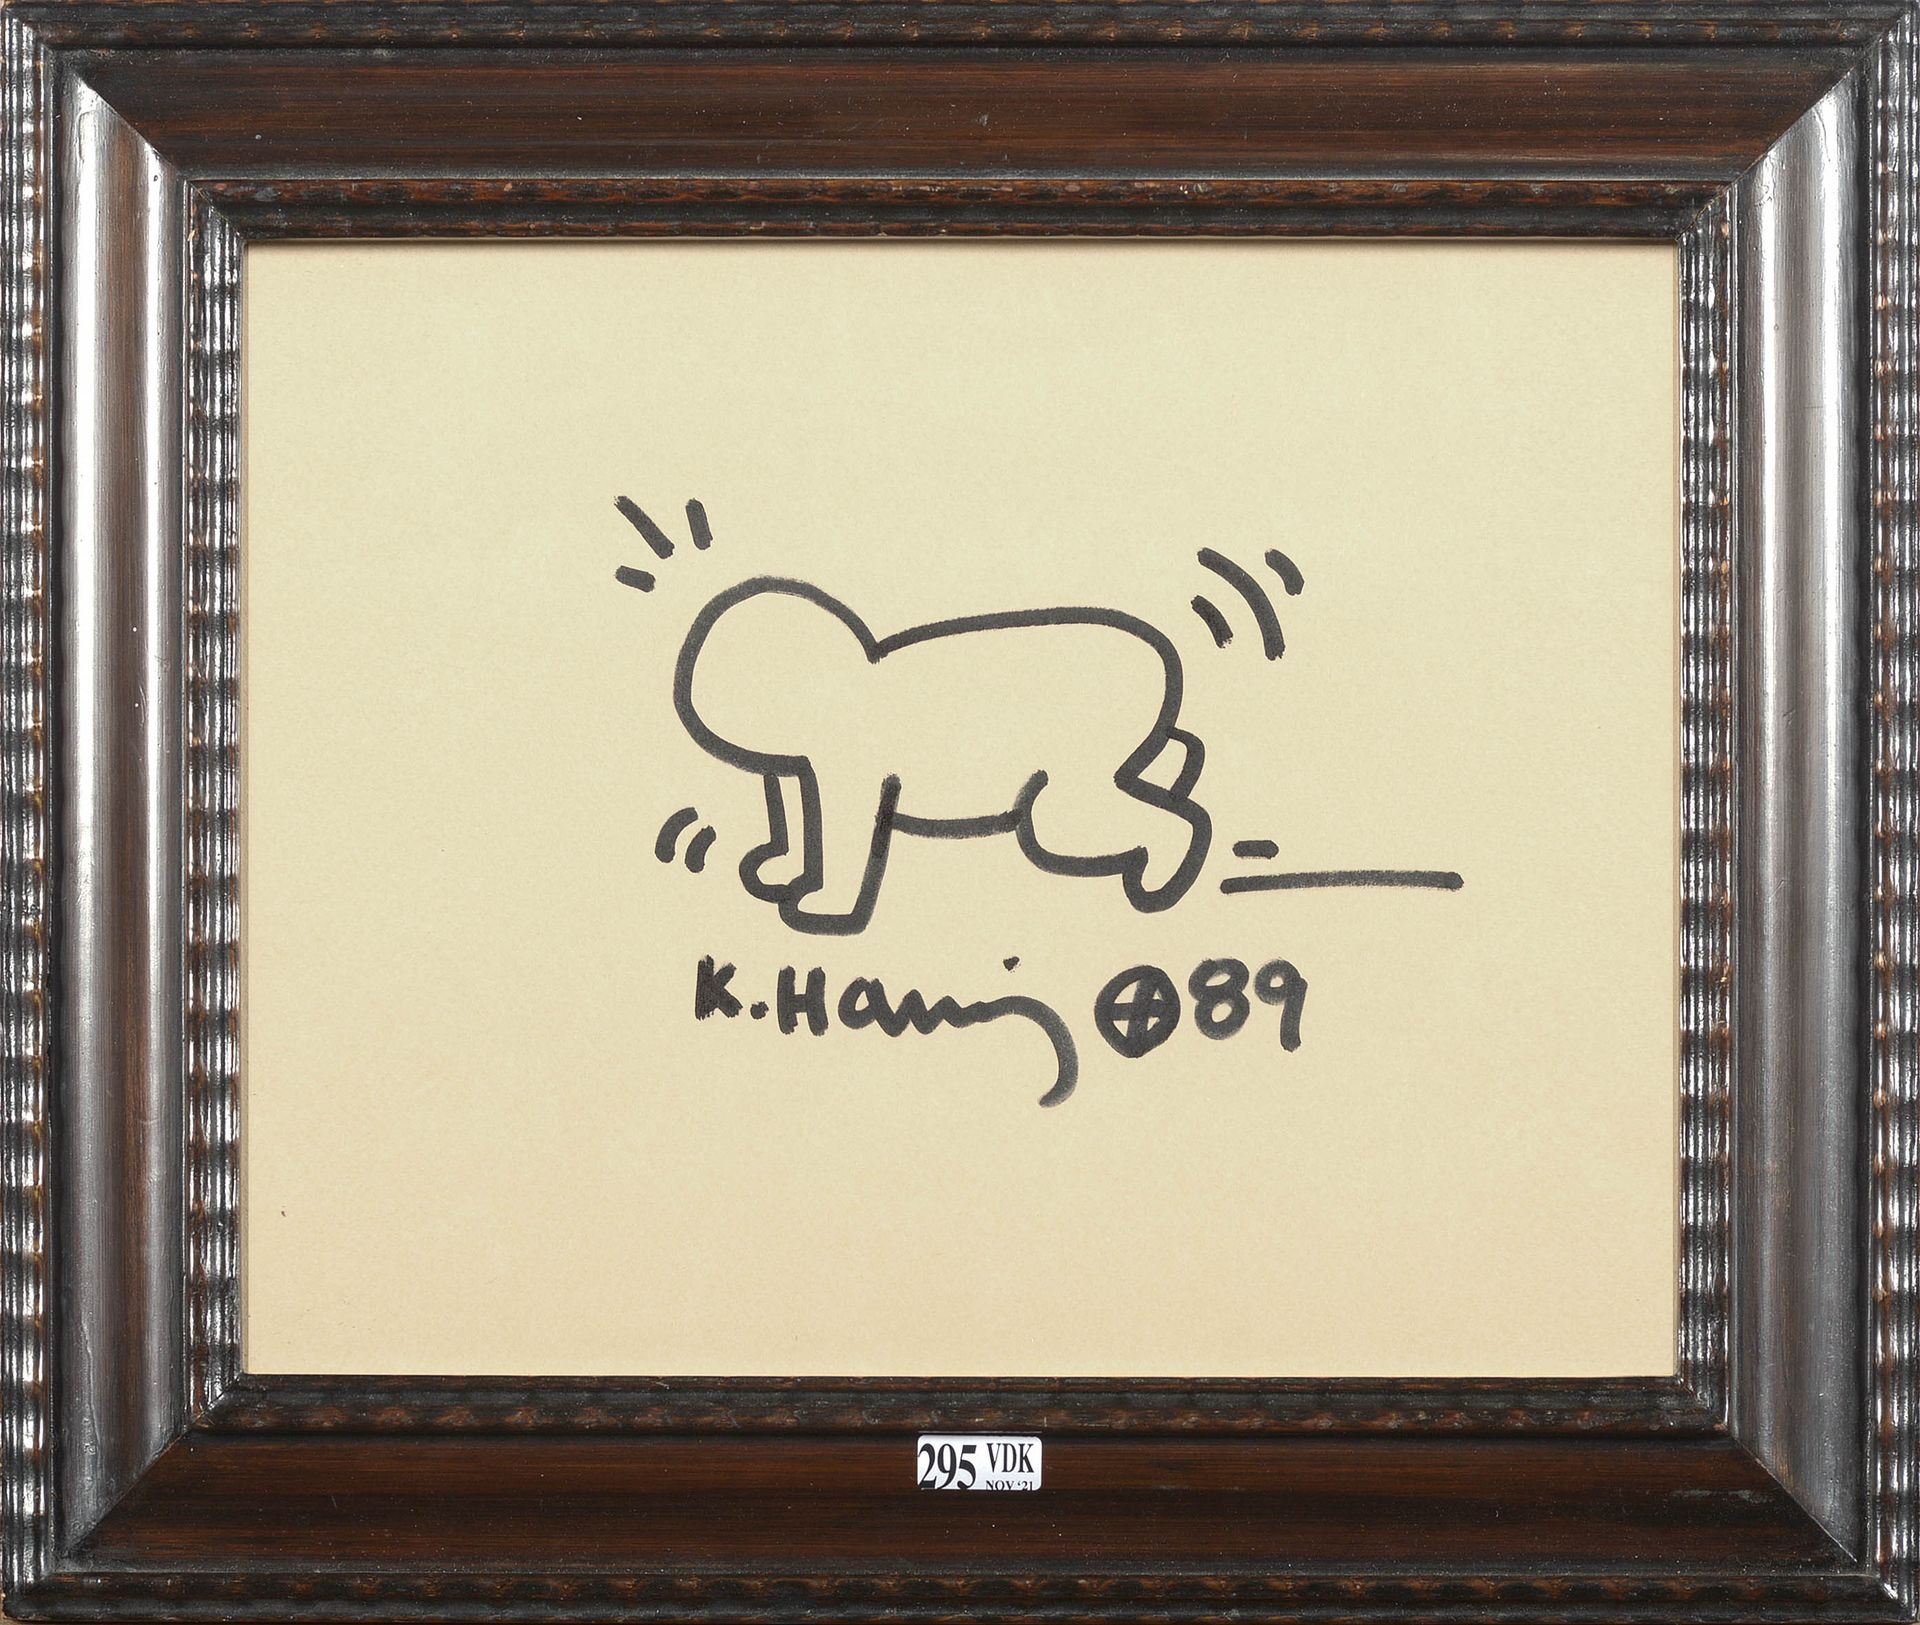 HARING Keith (1958 - 1990) "Baby" black felt pen on paper. Signed lower middle K&hellip;